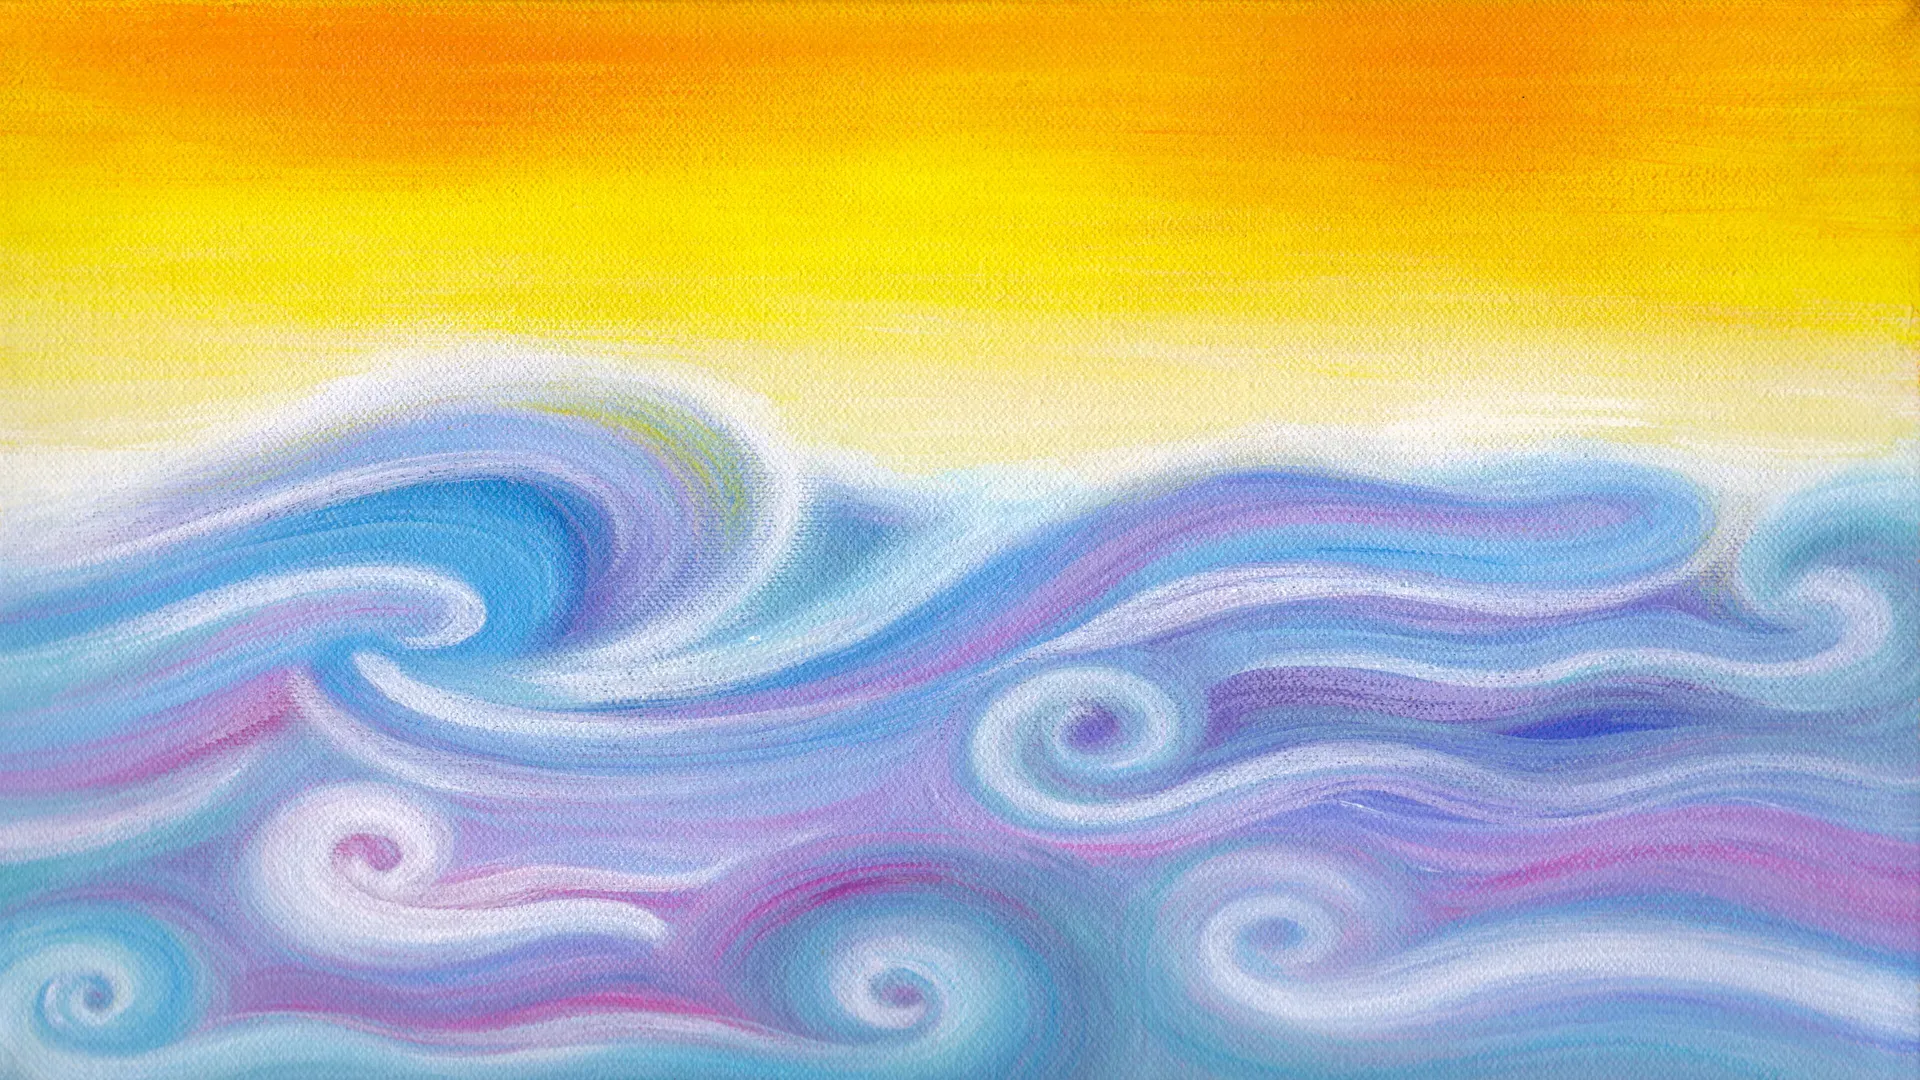 Acrylic abstract painting titled, Relief as whimsical waves in blue and purple hues and yellow orange sky